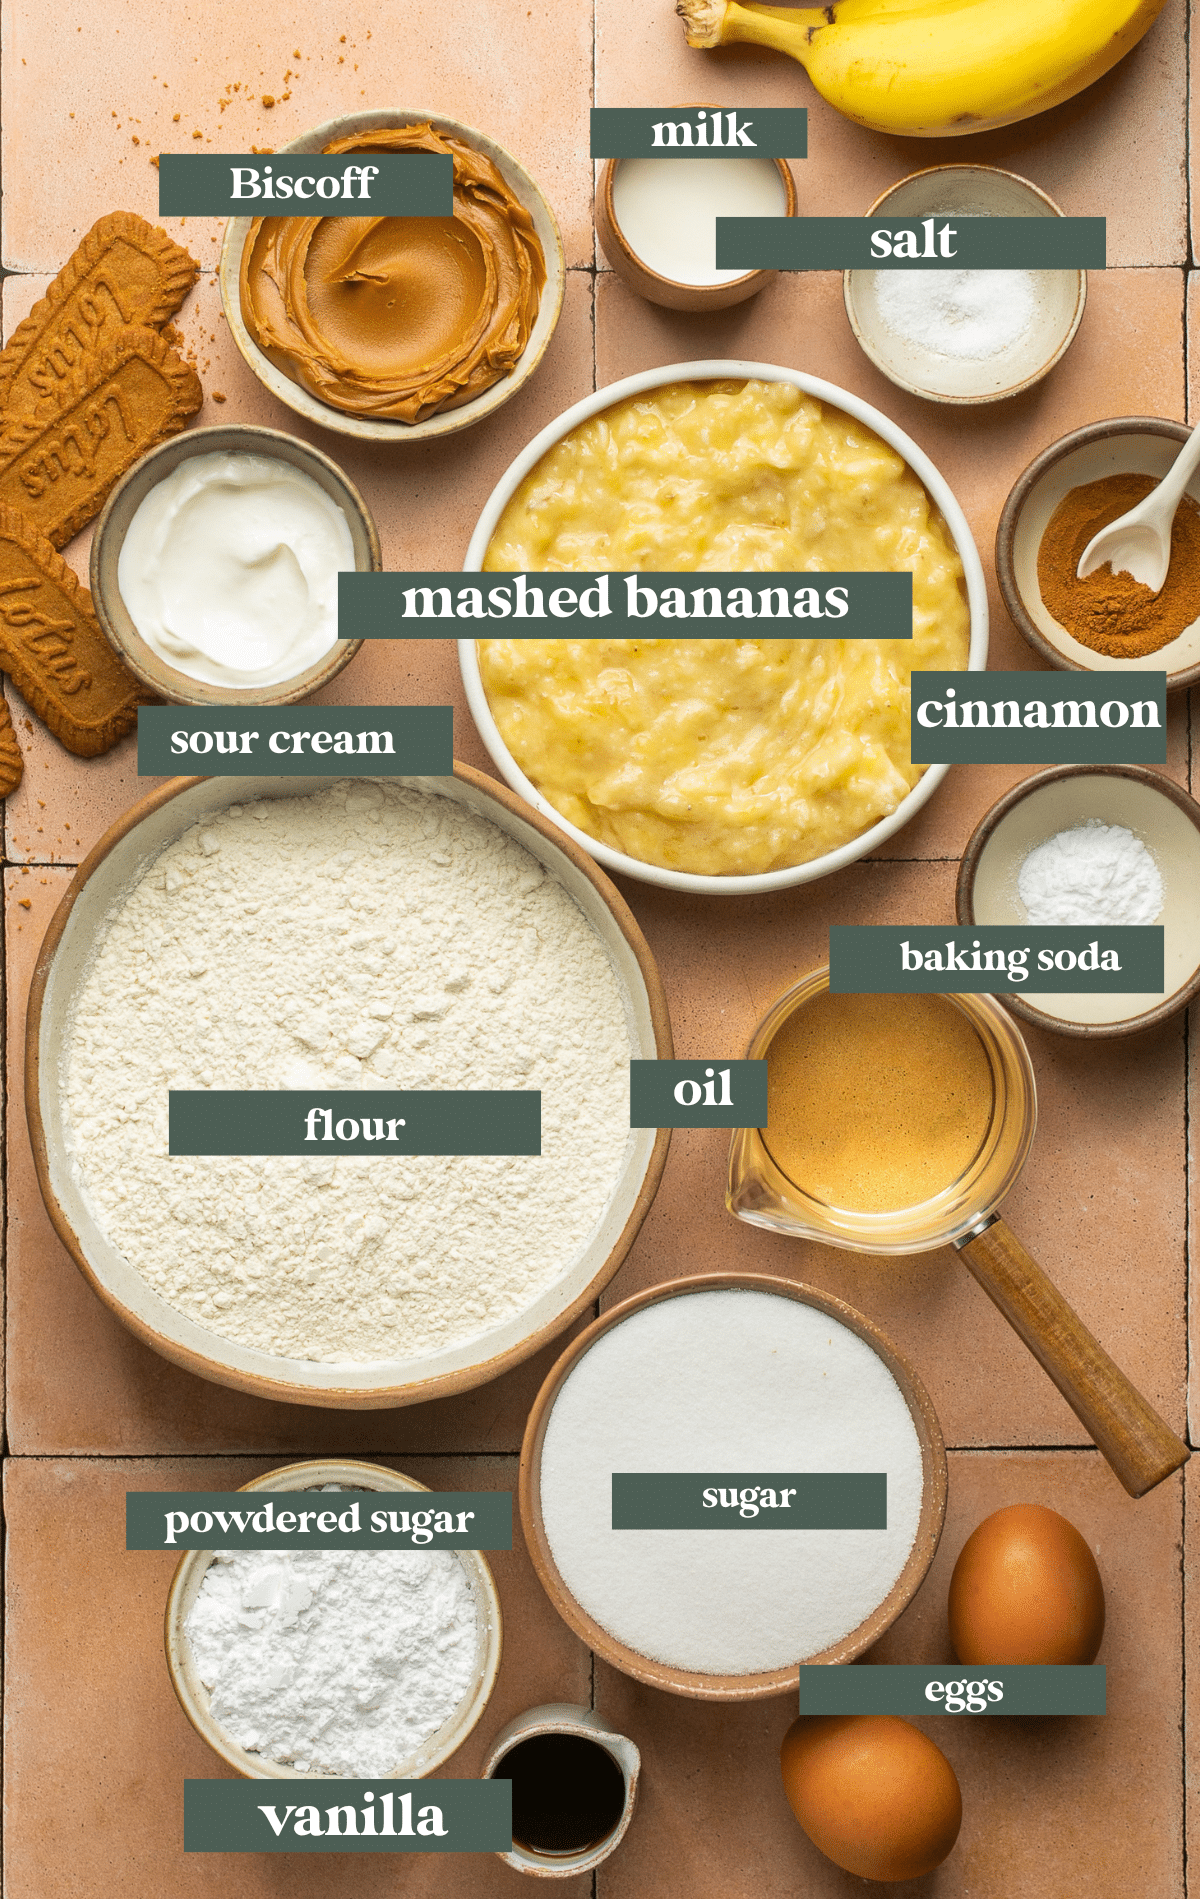 ingredients in small glass bowls needed to make banana bread.